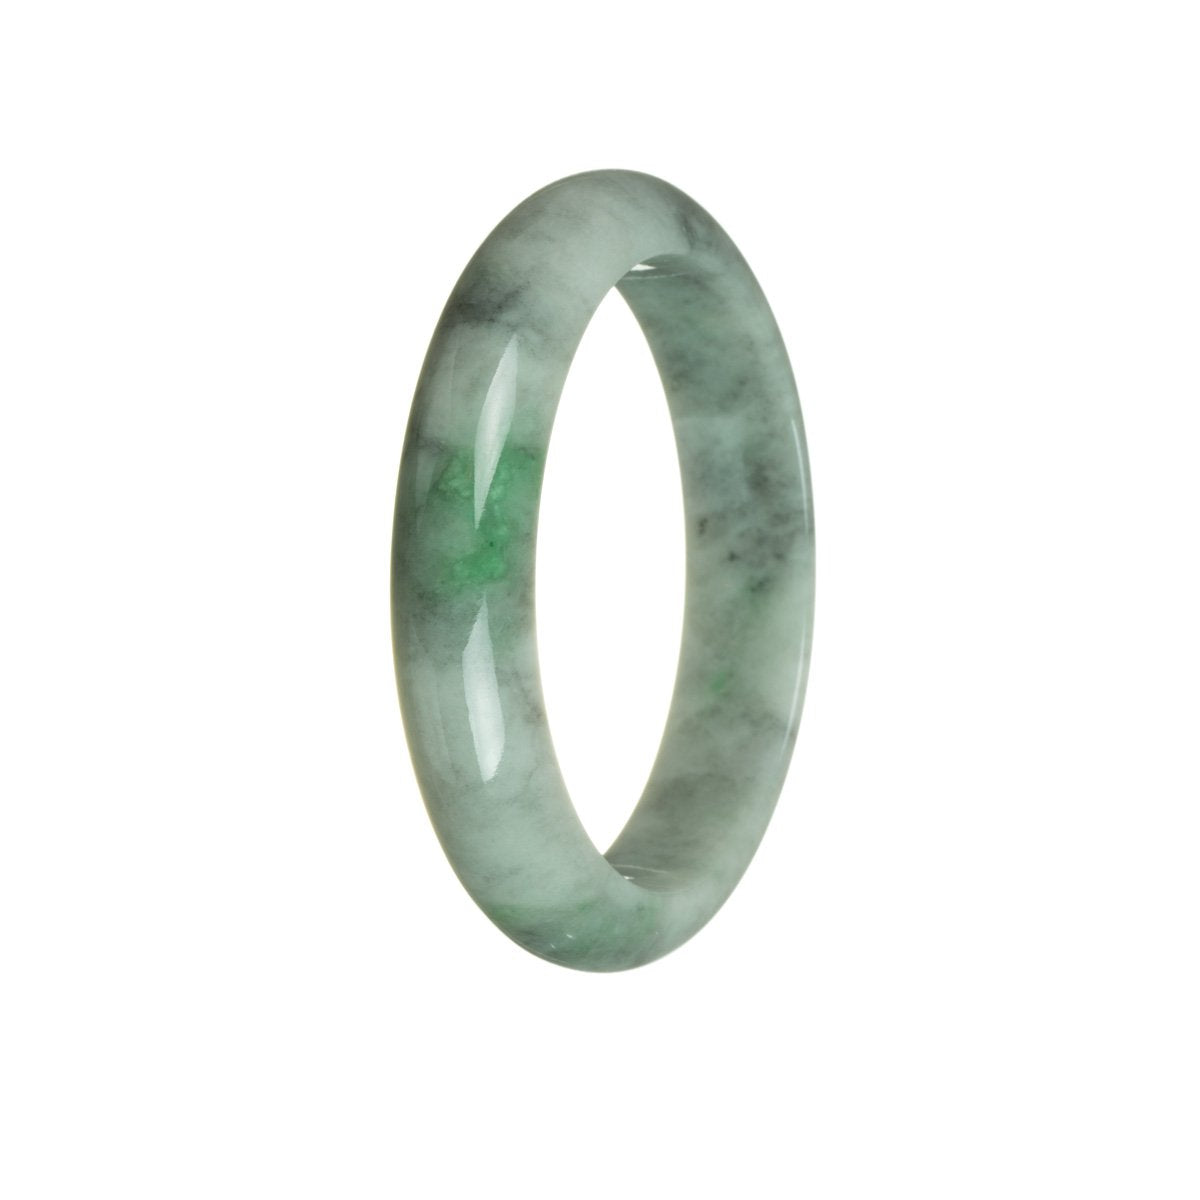 A close-up image of a Grade A Bluish Green with Grey Traditional Jade Bangle Bracelet. The bracelet is shaped like a half moon and has a diameter of 58mm. It is certified and crafted by MAYS™.